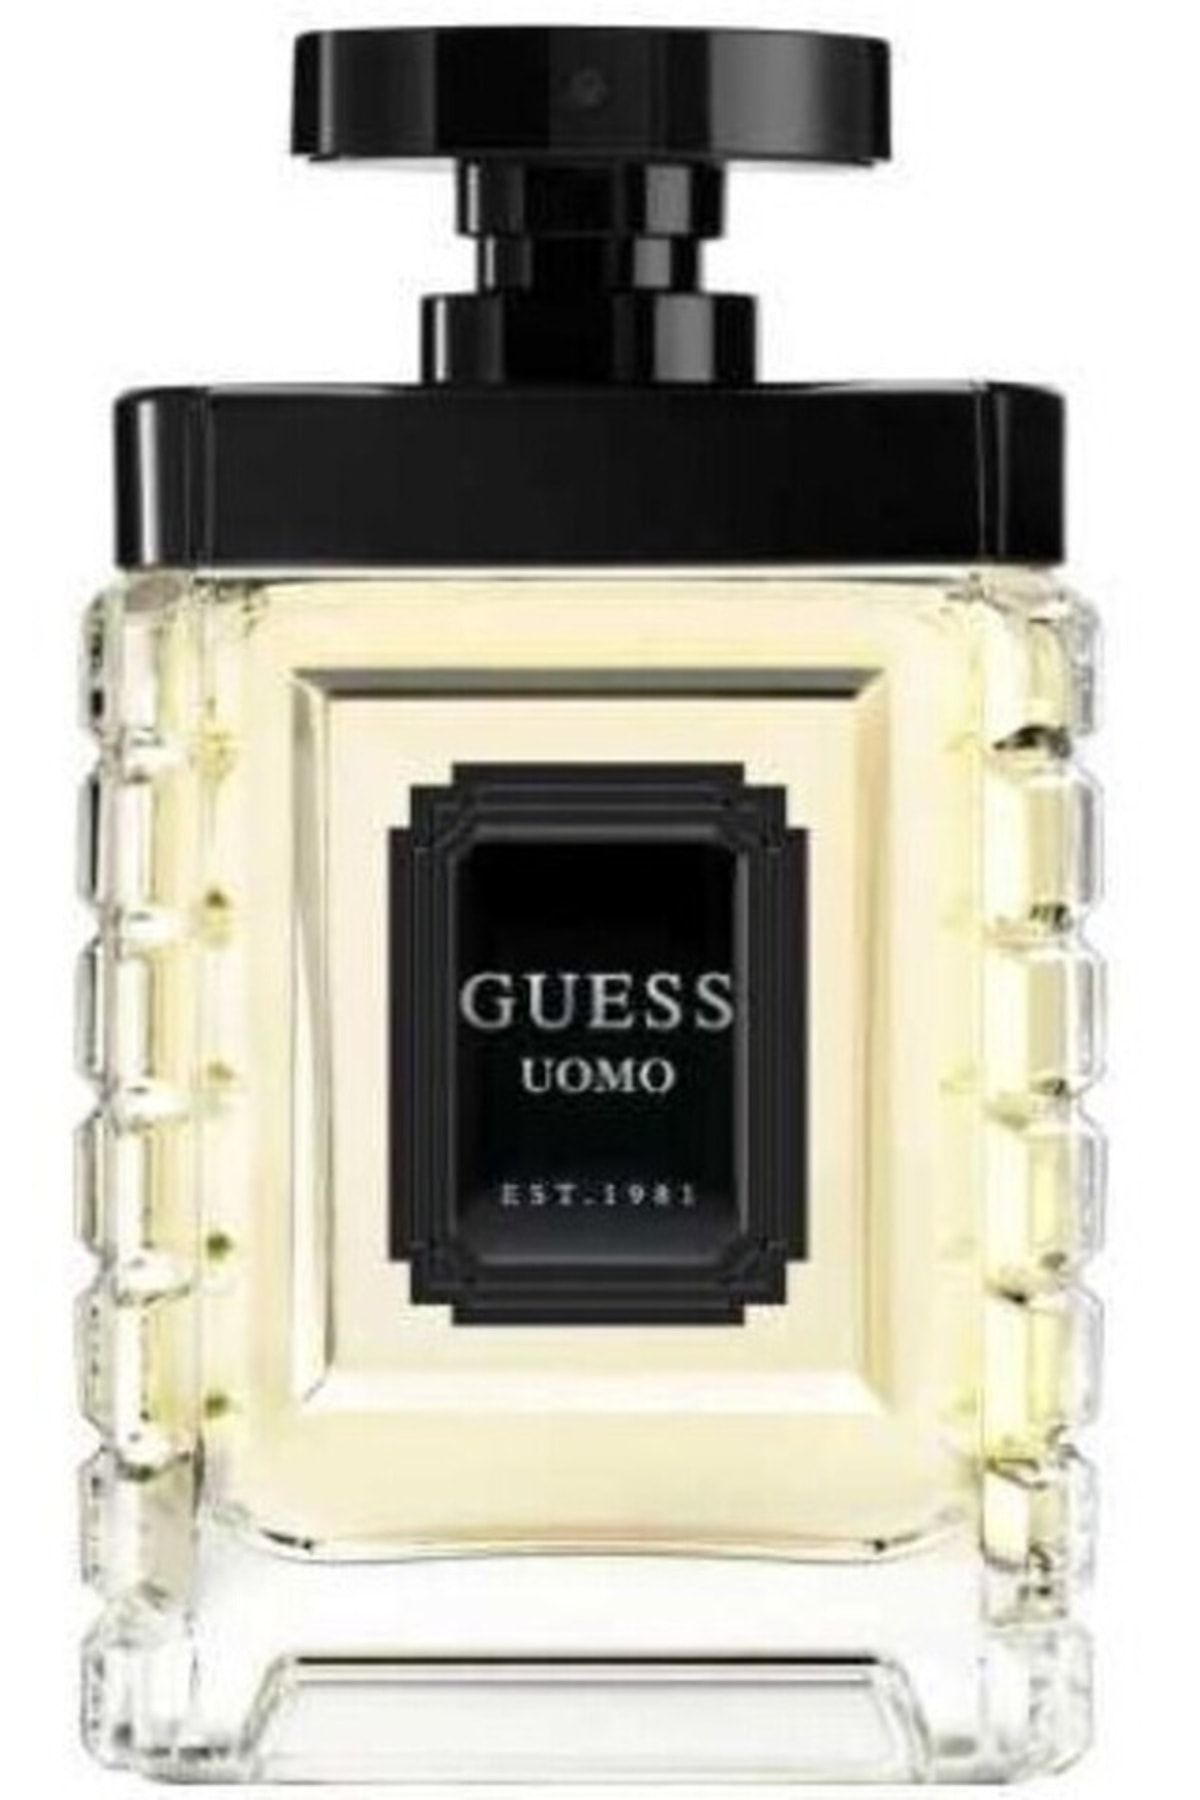 Guess Uomo Edt 50 ml